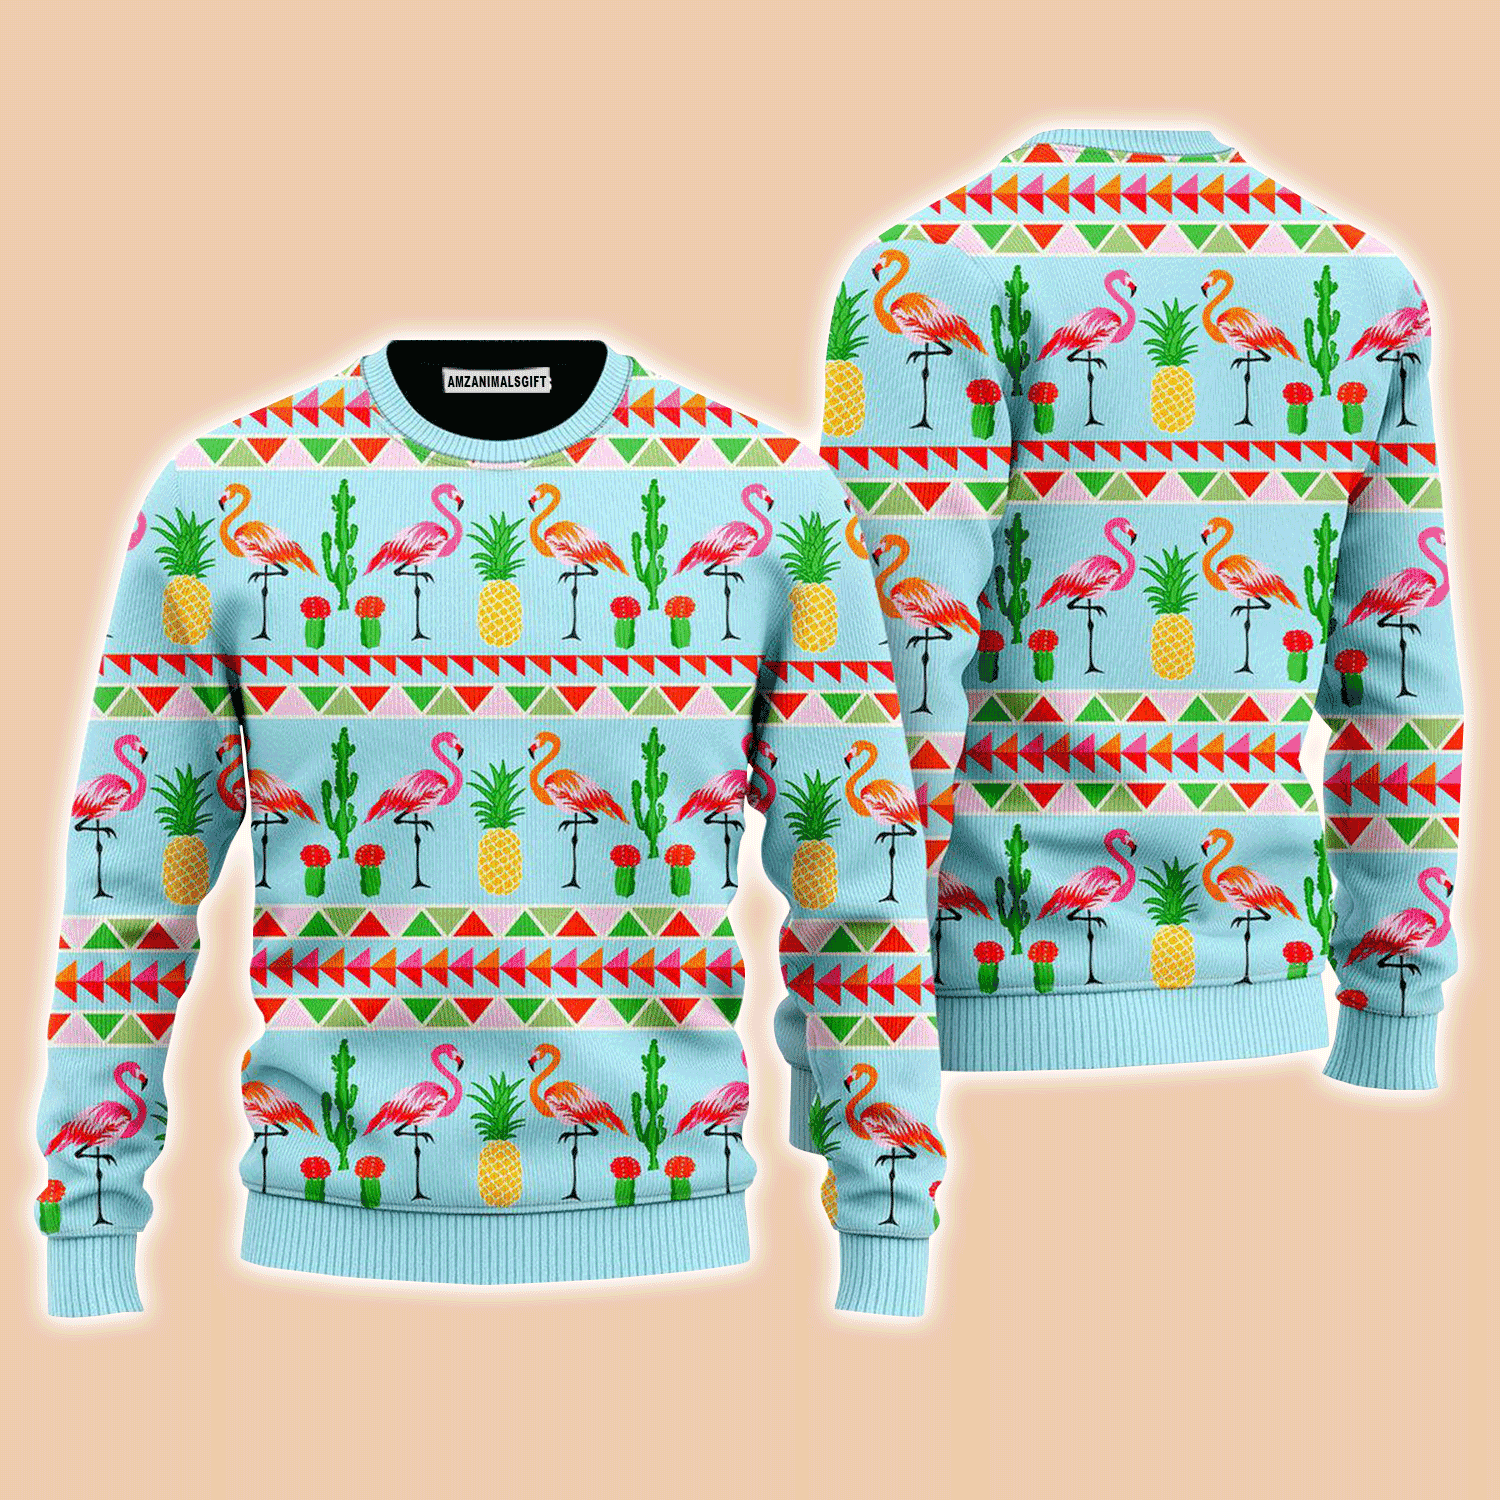 Flamingo Flamingle All The Way Pattern Sweater, Ugly Sweater For Men & Women, Perfect Outfit For Christmas New Year Autumn Winter